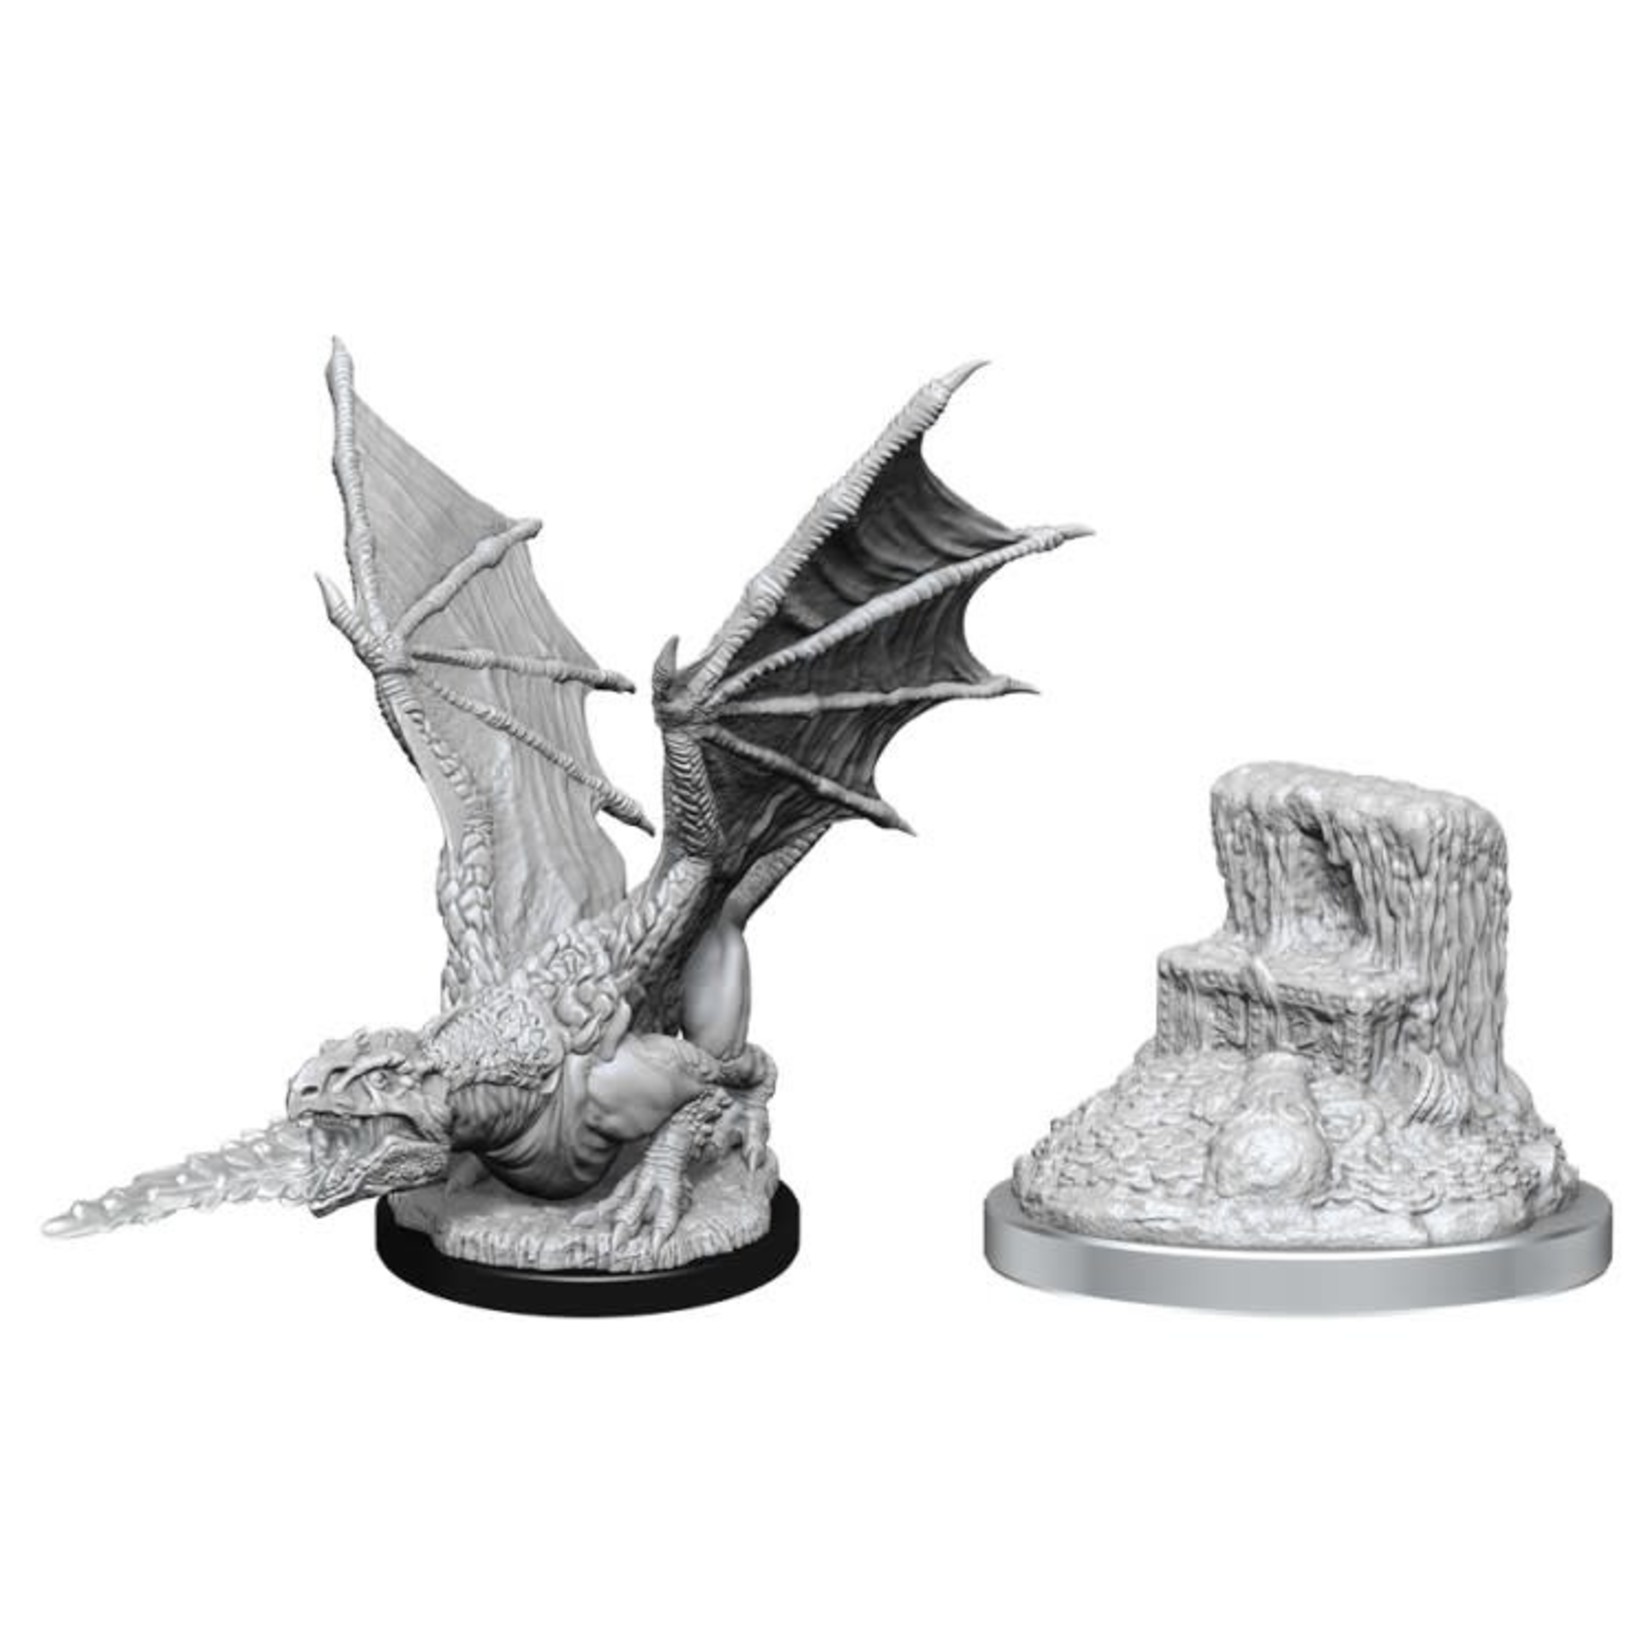 WizKids Dungeons and Dragons Nolzur's Marvelous Minis White Dragon Wyrmling